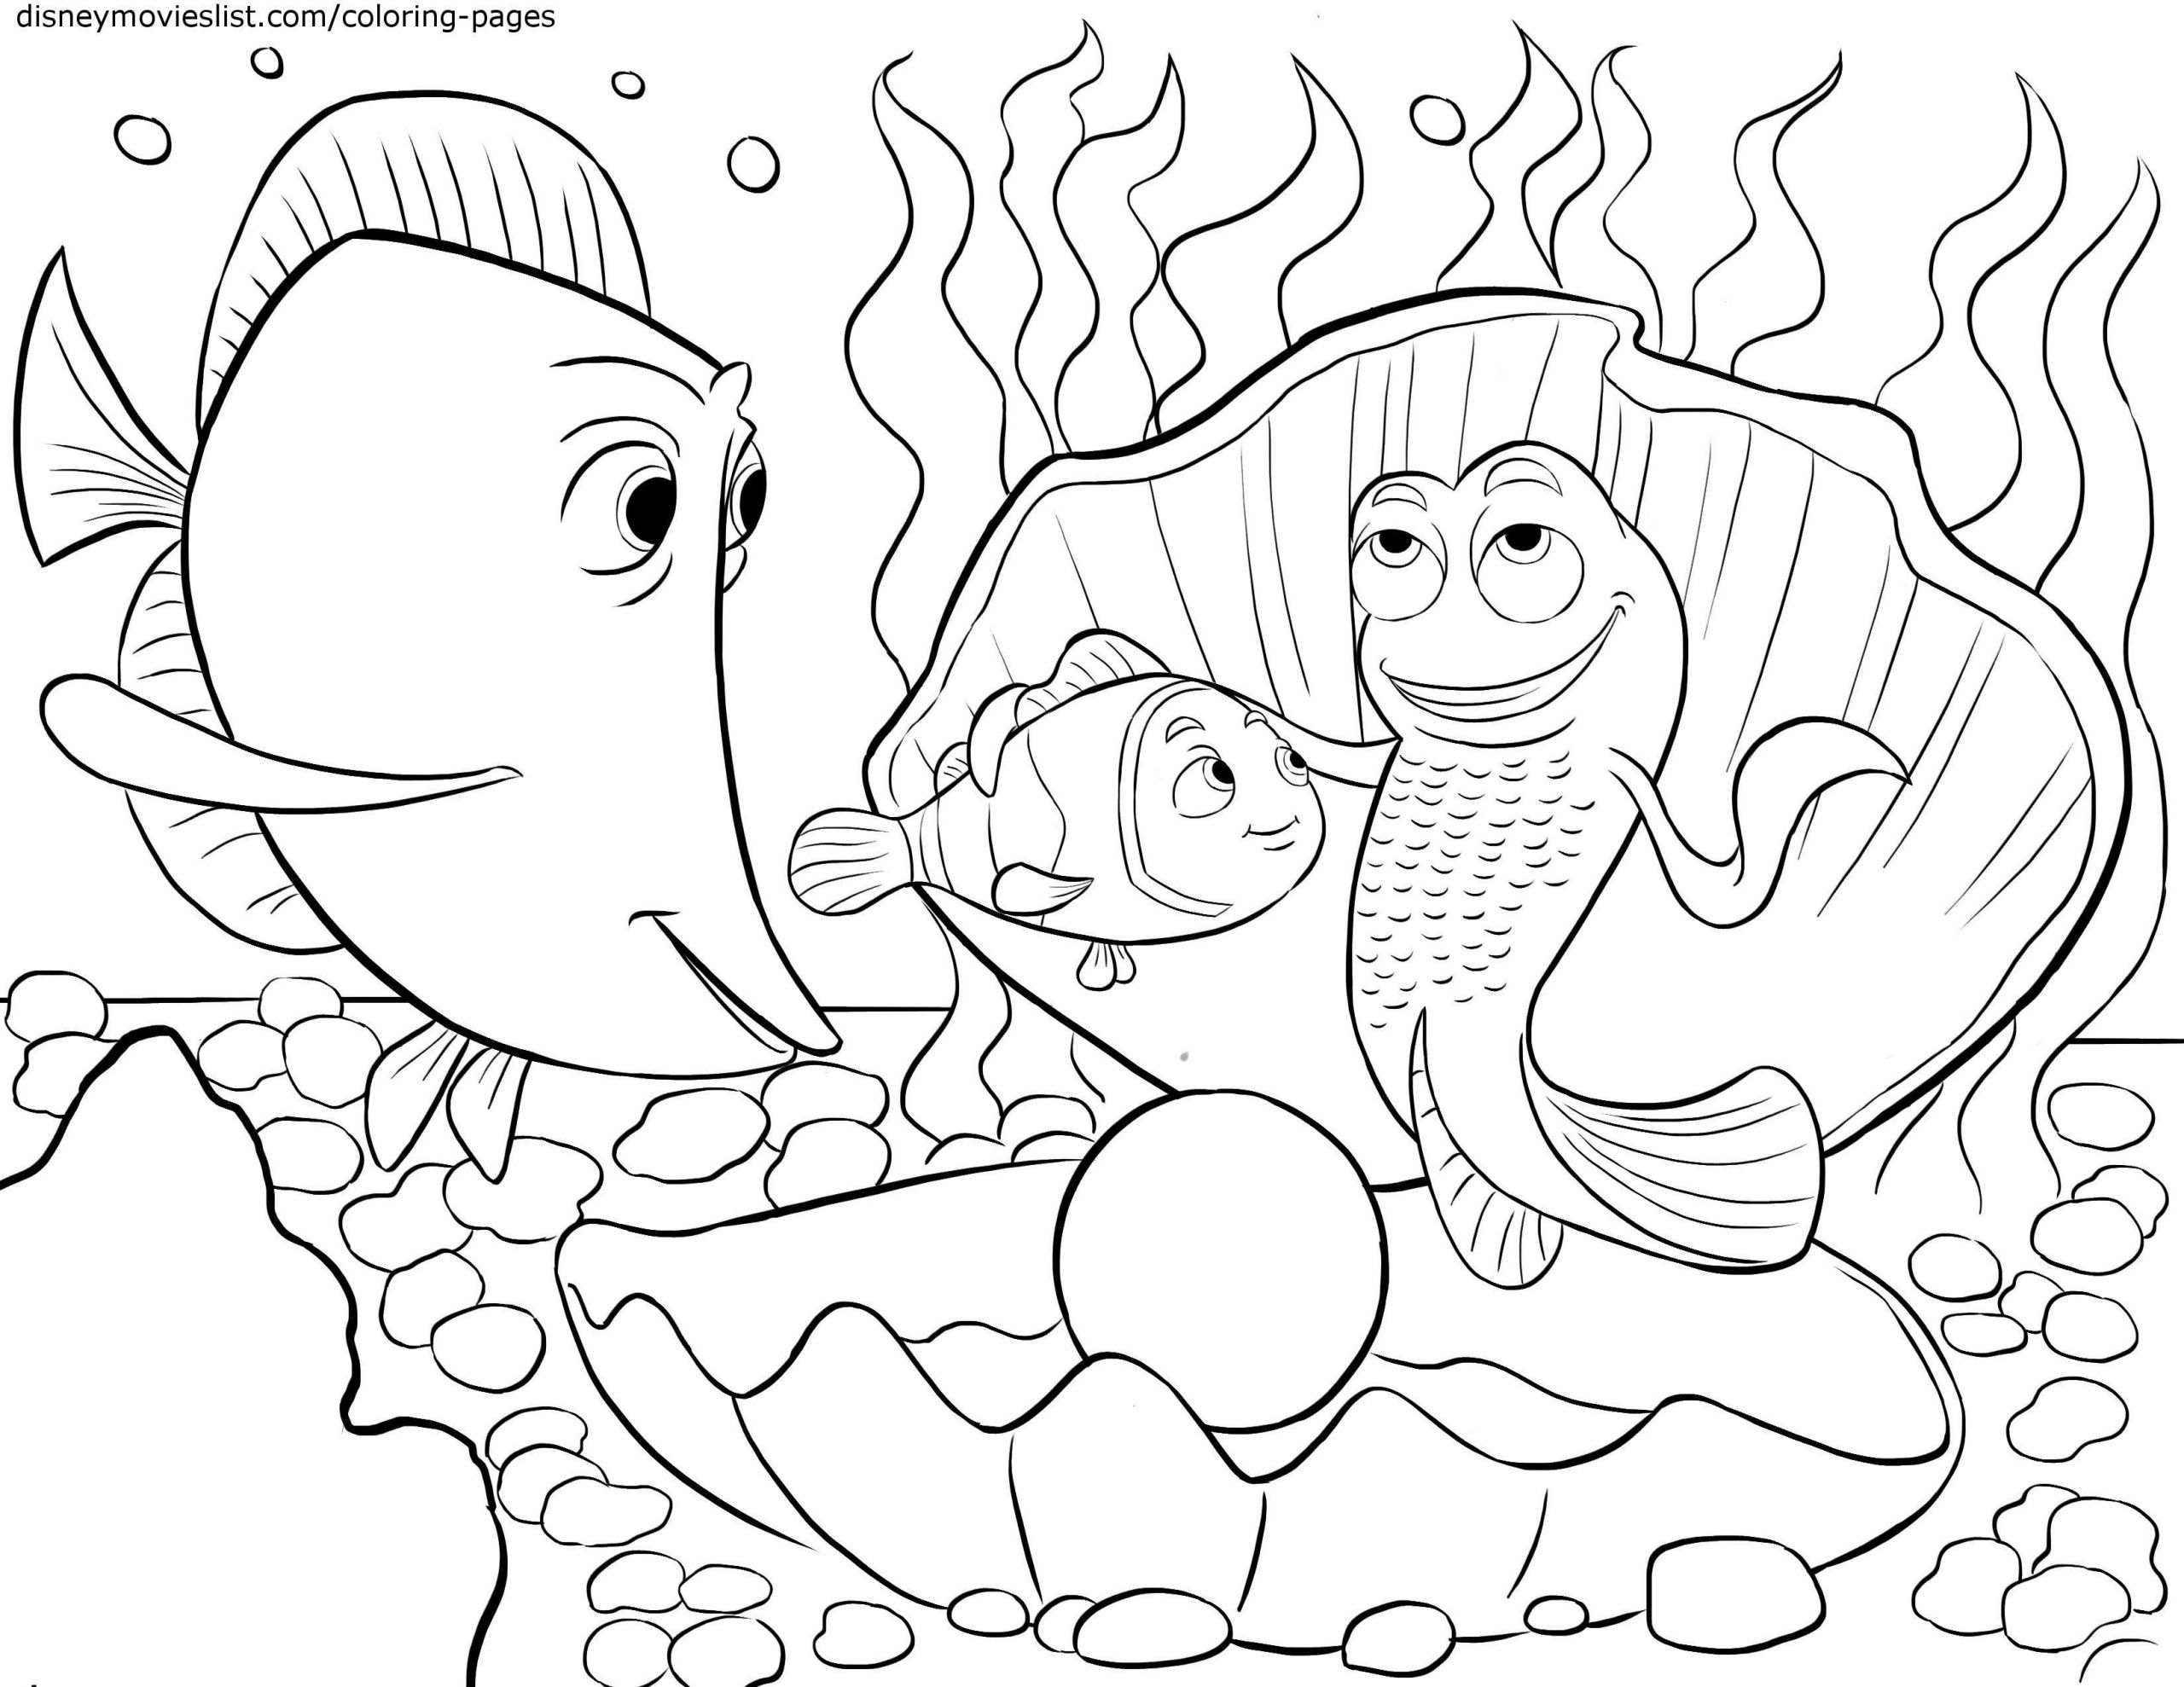 Pdf Coloring Pages For Kids
 Coloring Pages Marvellous Coloring Pages For Kids Pdf